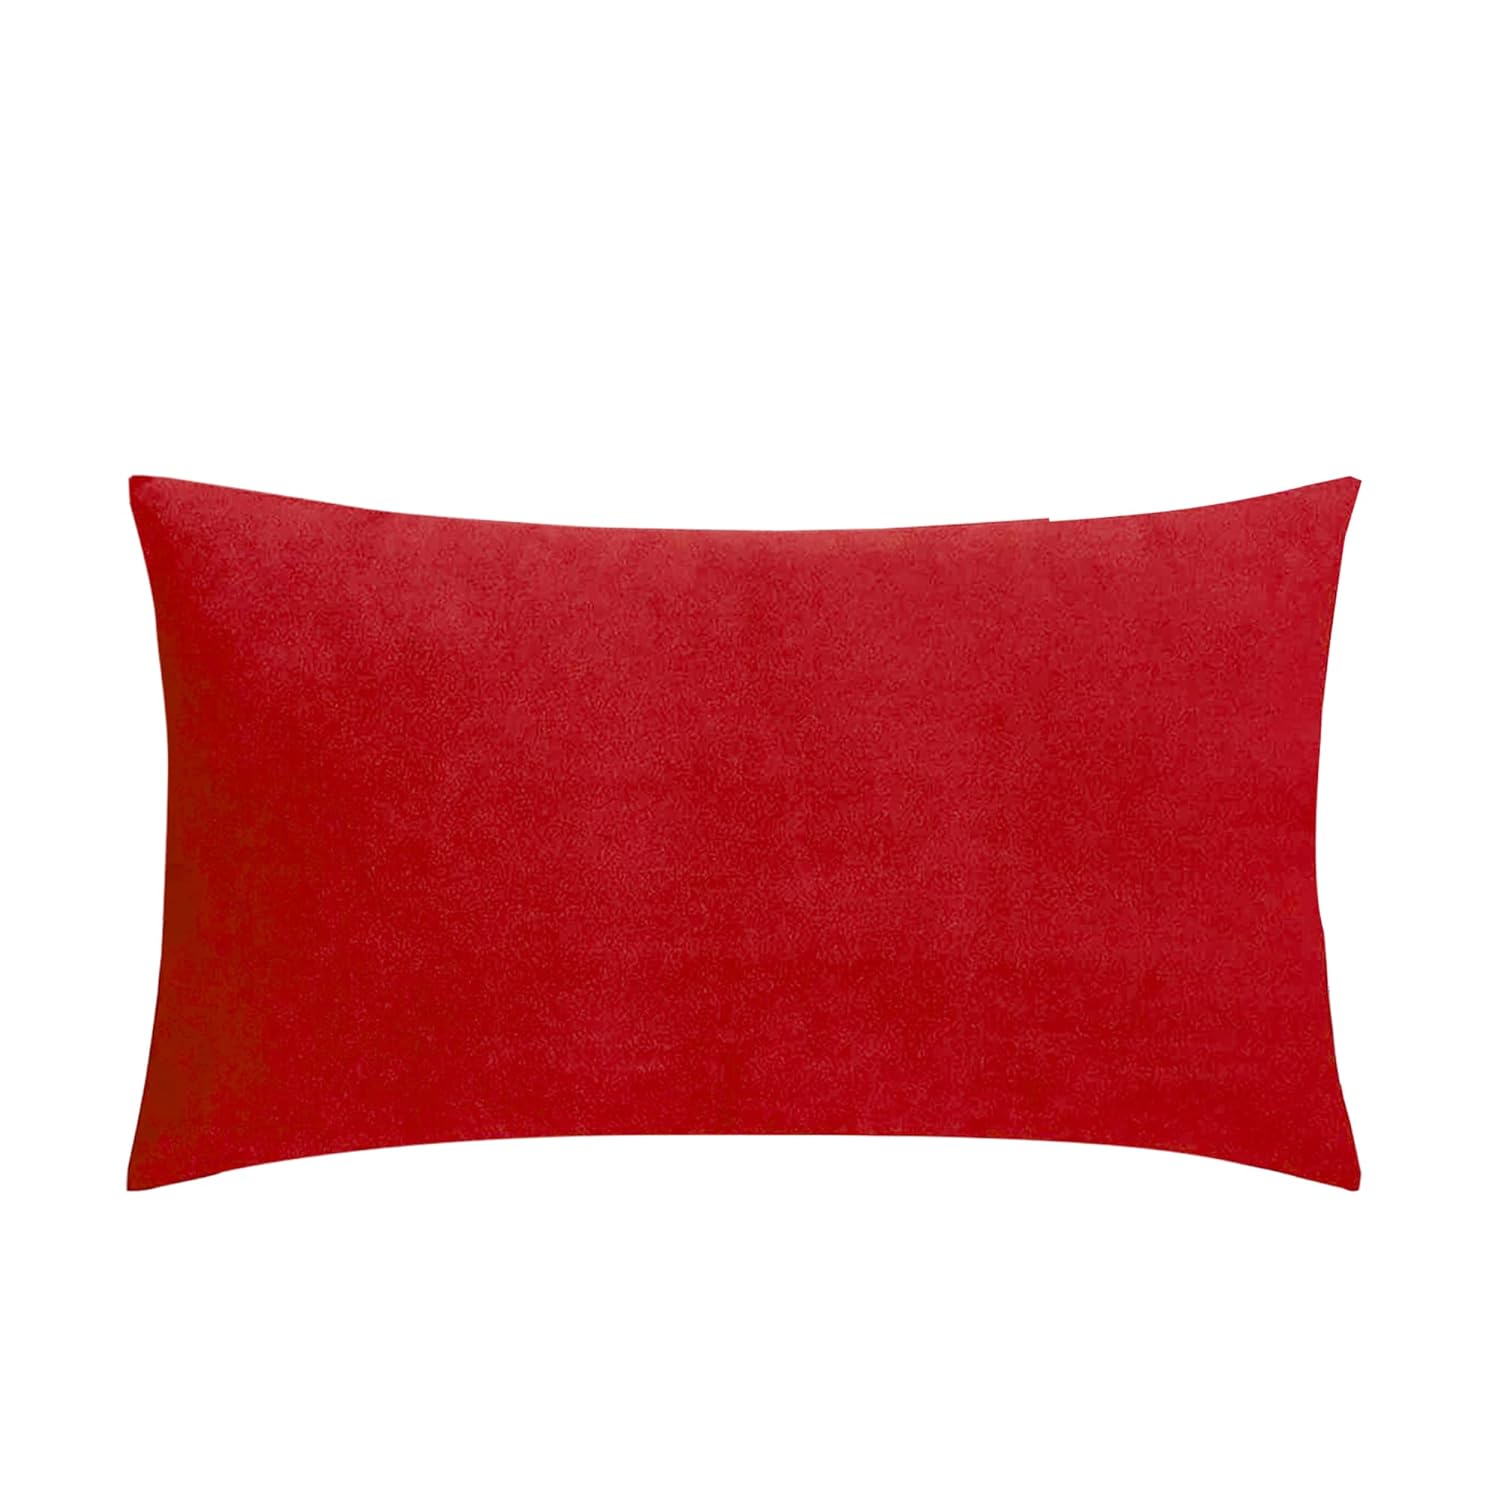 Cotton Waterproof Pillow Protector